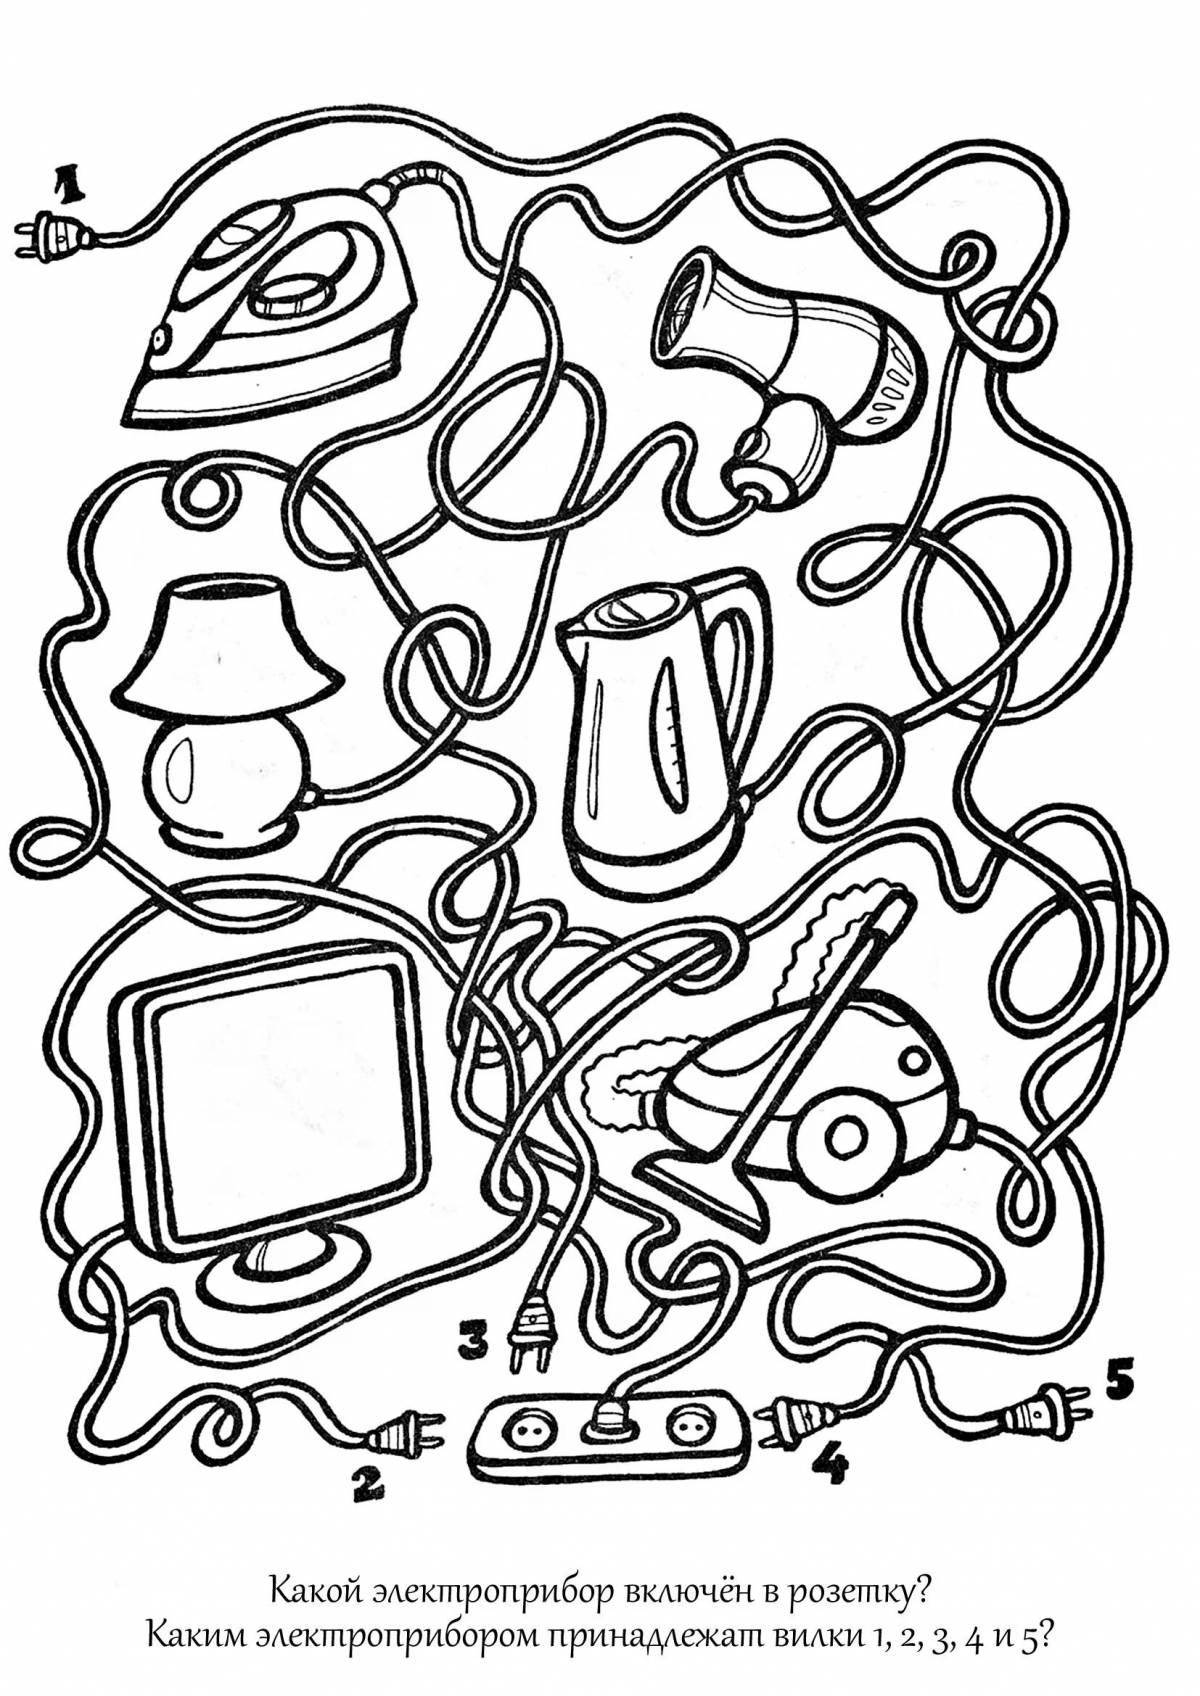 Entertainment household appliances coloring book for preschoolers 2-3